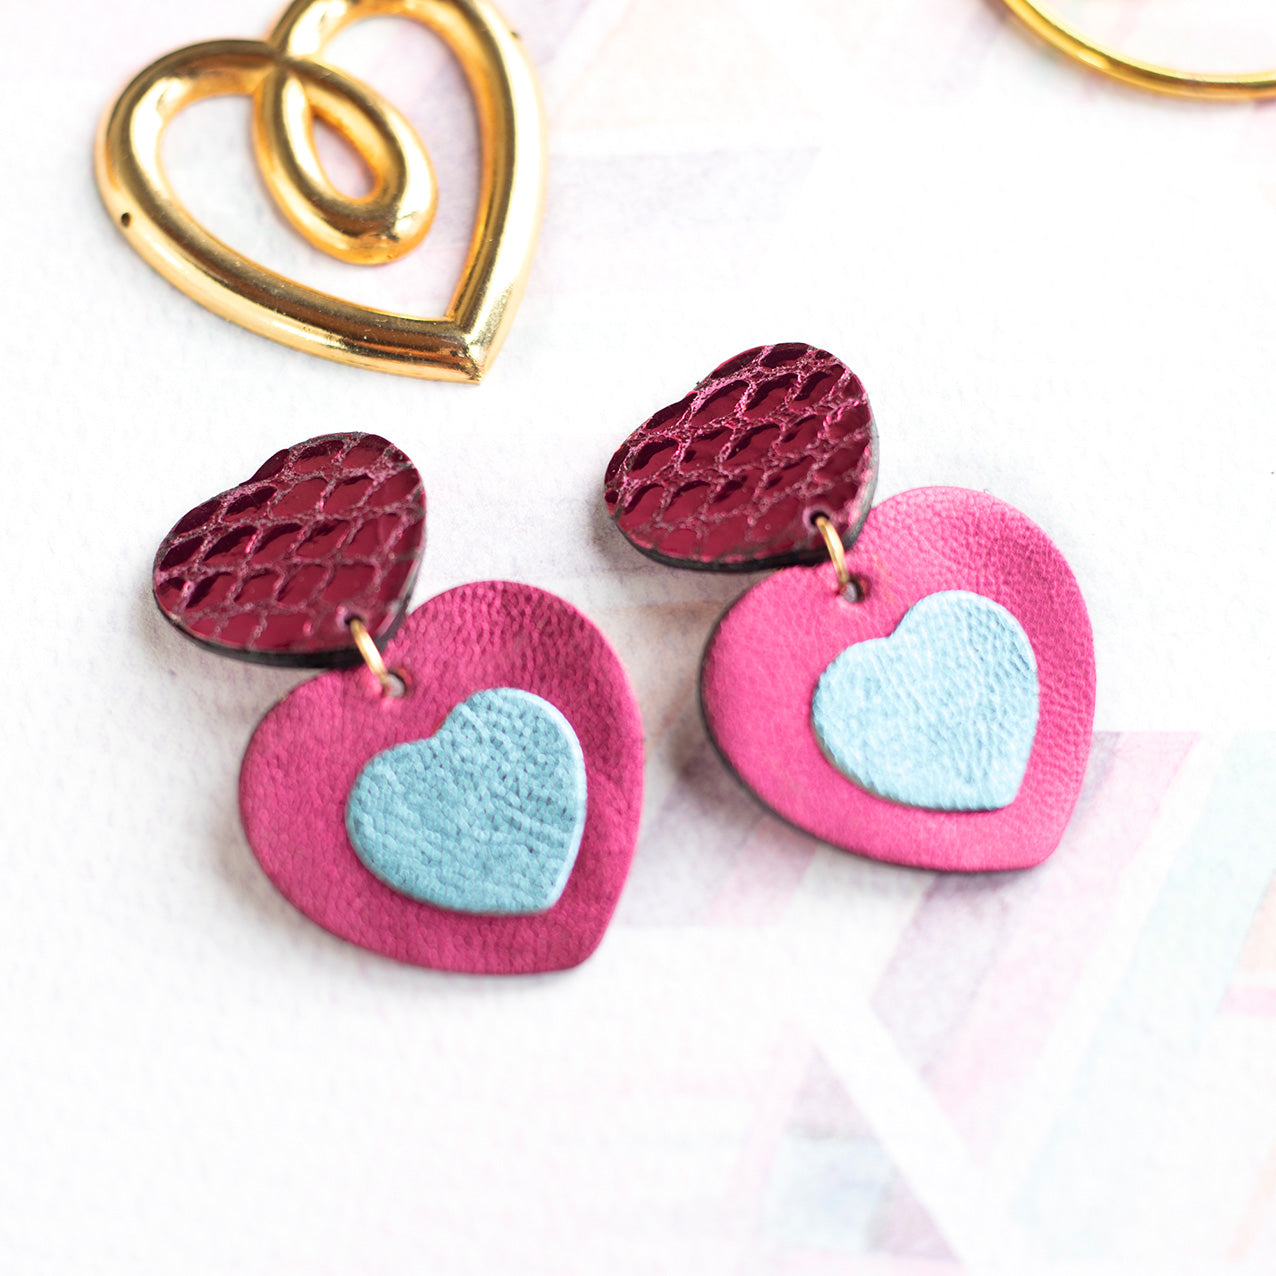 Double Hearts clip-on earrings - metallic raspberry and blue leather